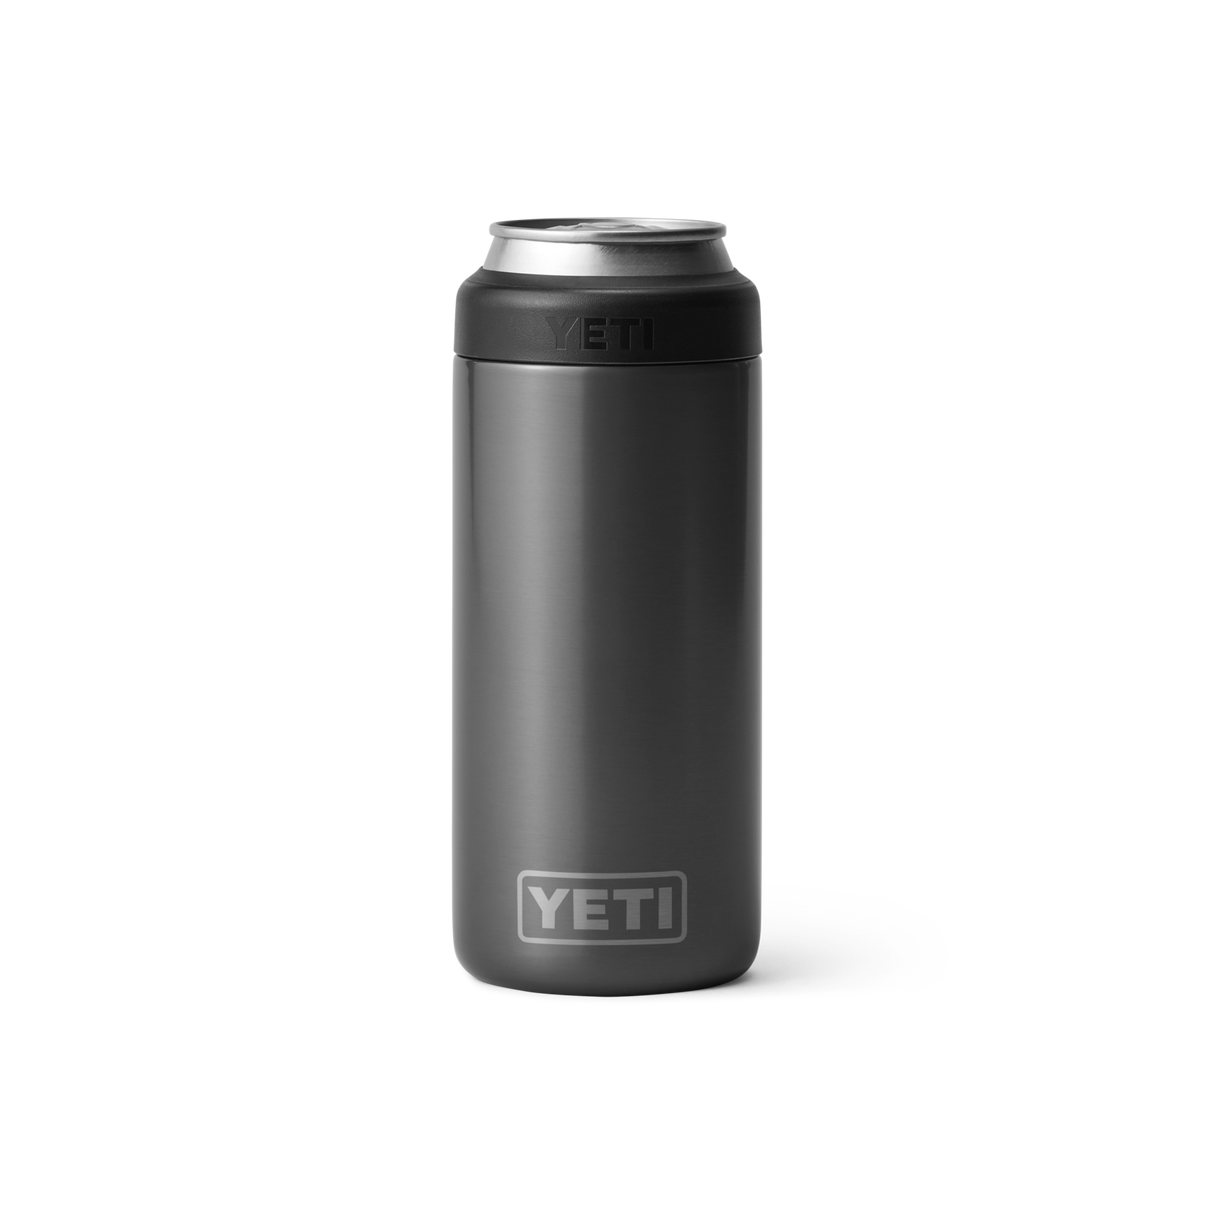  YETI Rambler 12 oz. Colster Slim Can Insulator for the